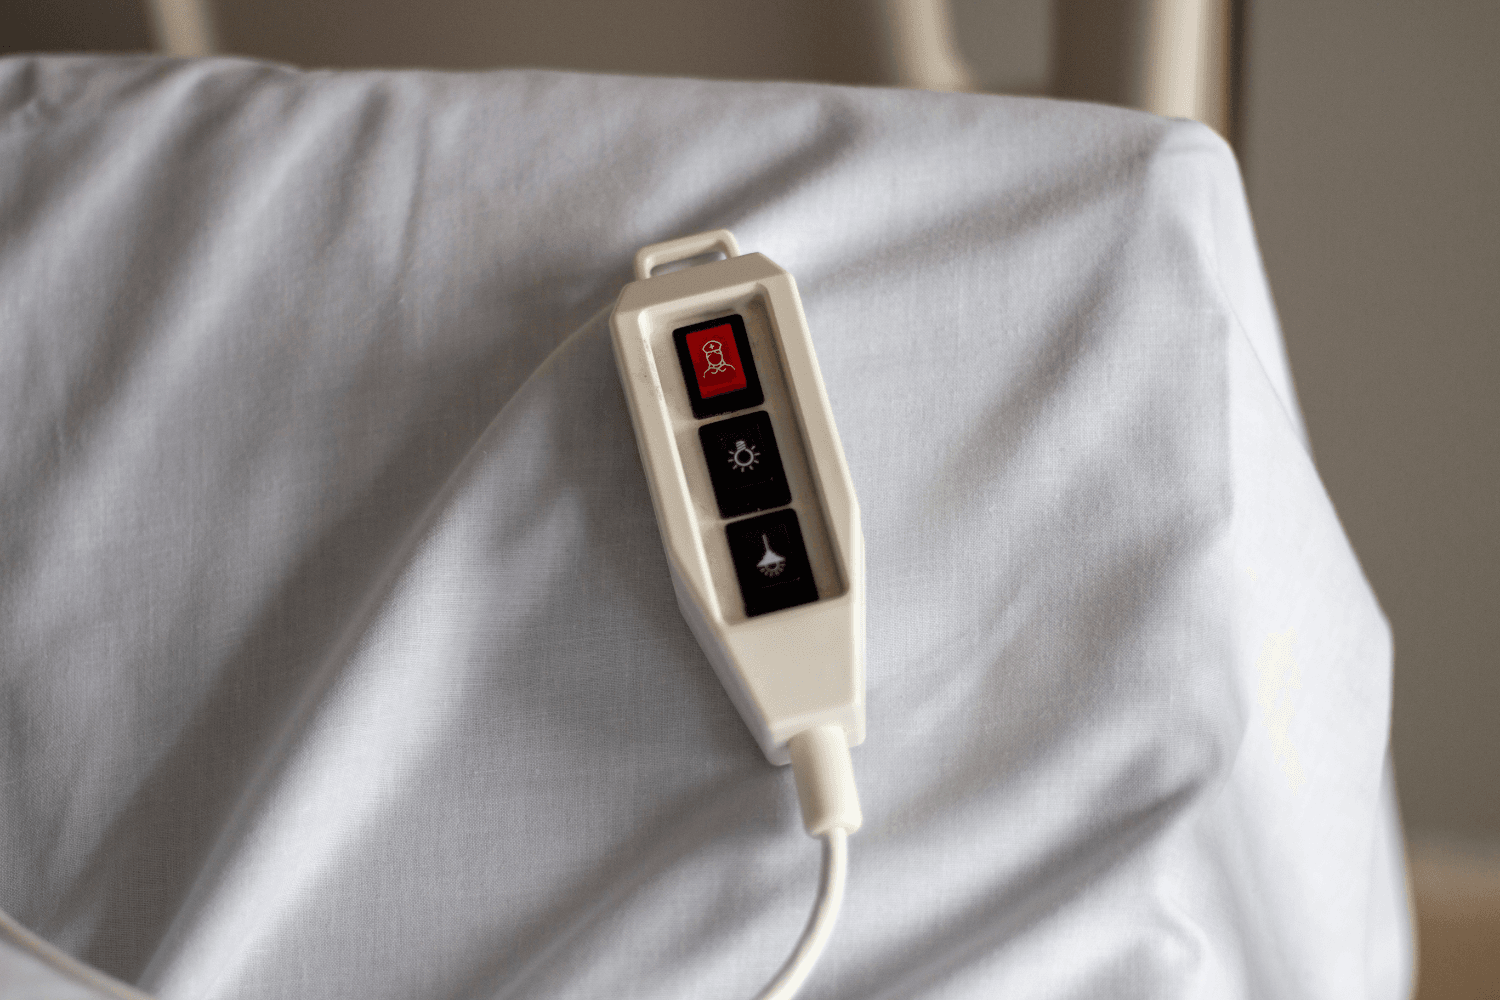 Image of bed alarm.